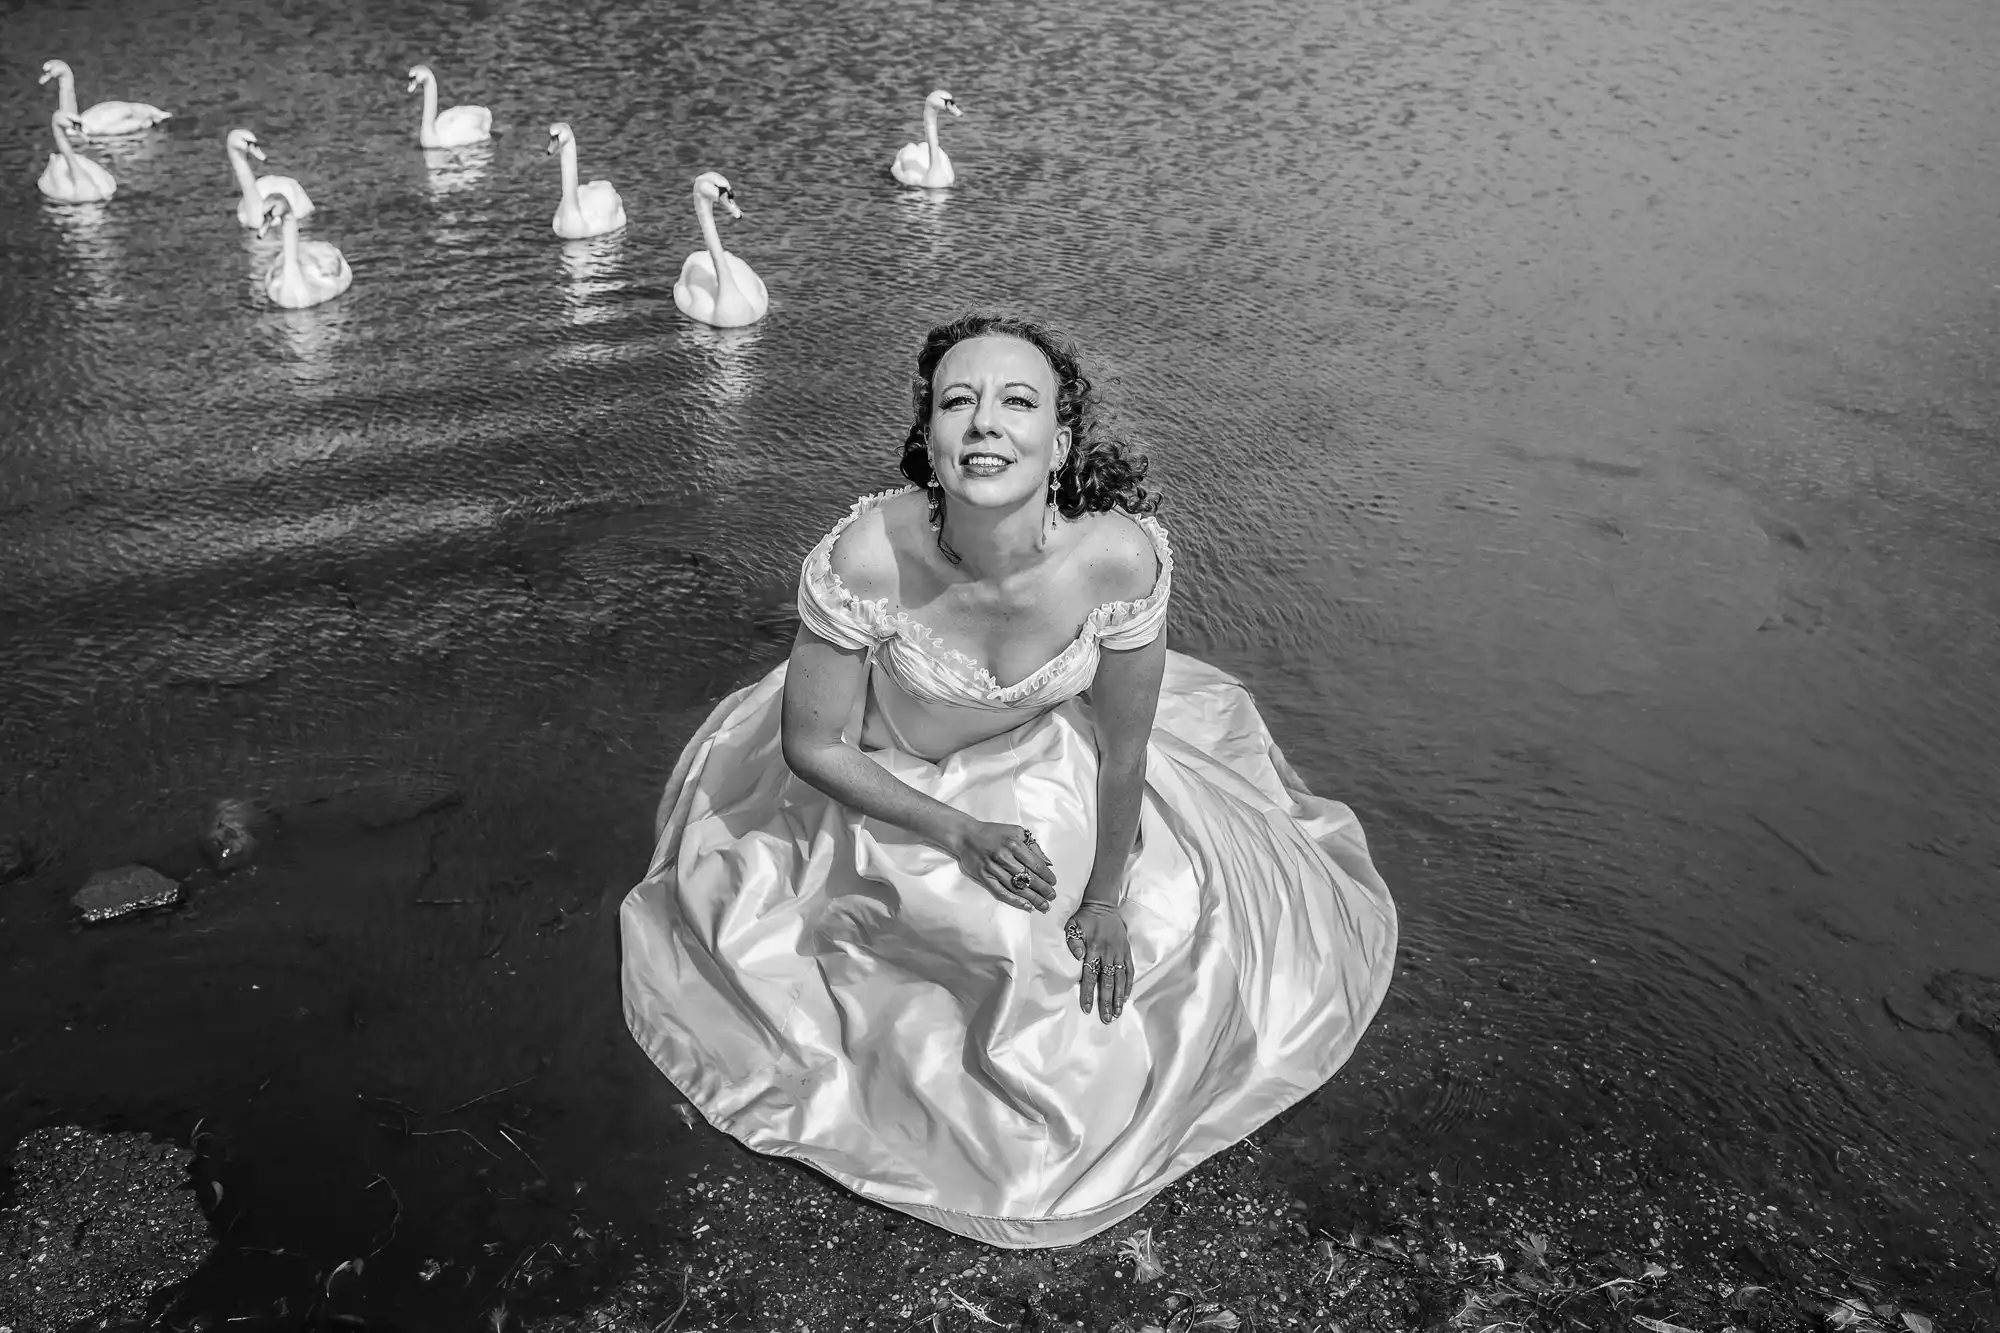 Woman in an elegant white dress sitting in shallow water surrounded by swans, black and white photography.